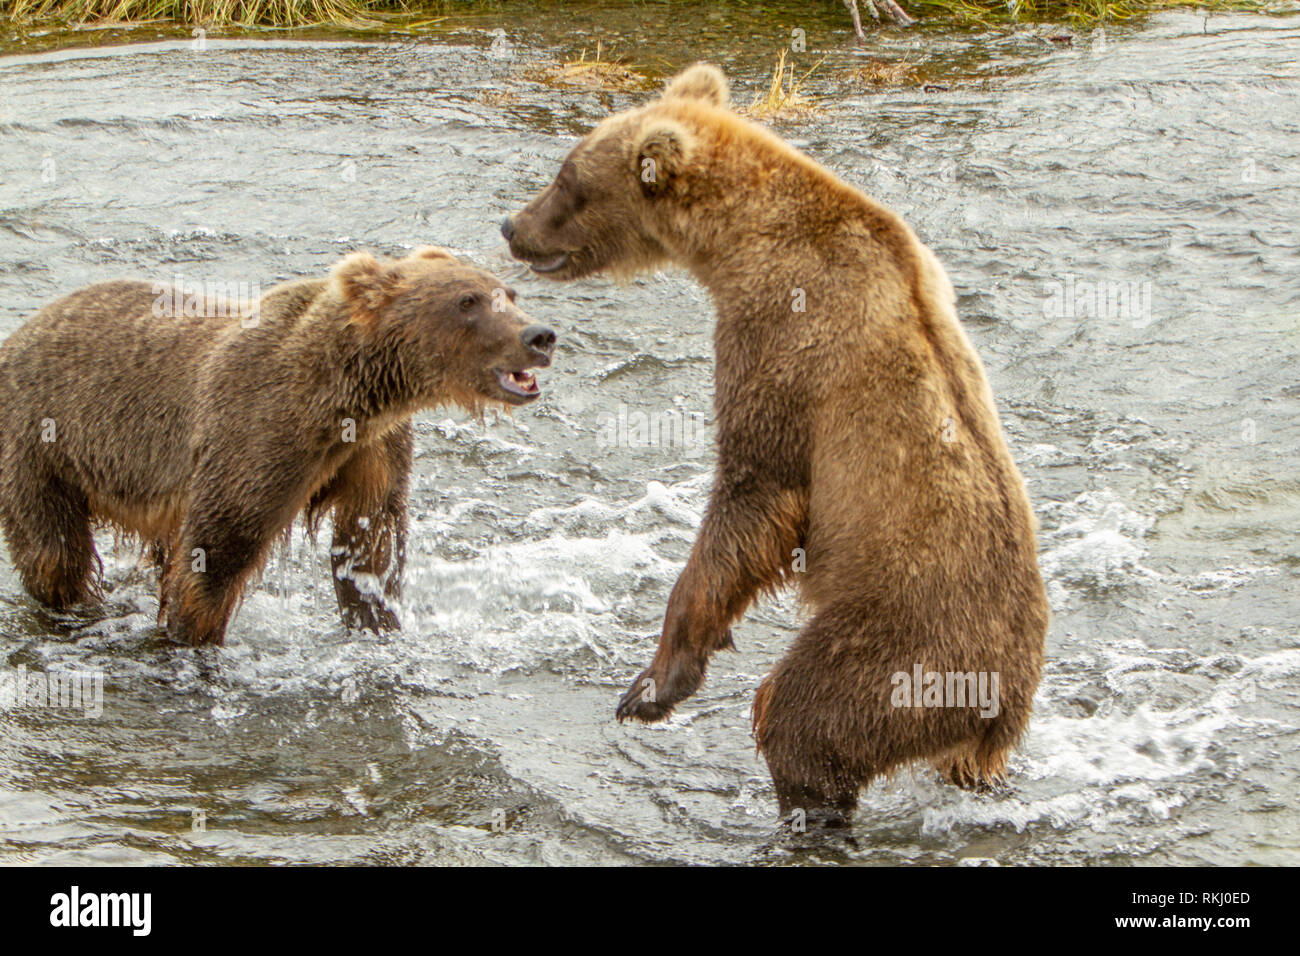 Two grizzly brown bears fighting in a river at Brooks Falls, Alaska, USA. One bear is standing while the other is on all four legs baring its teeth Stock Photo